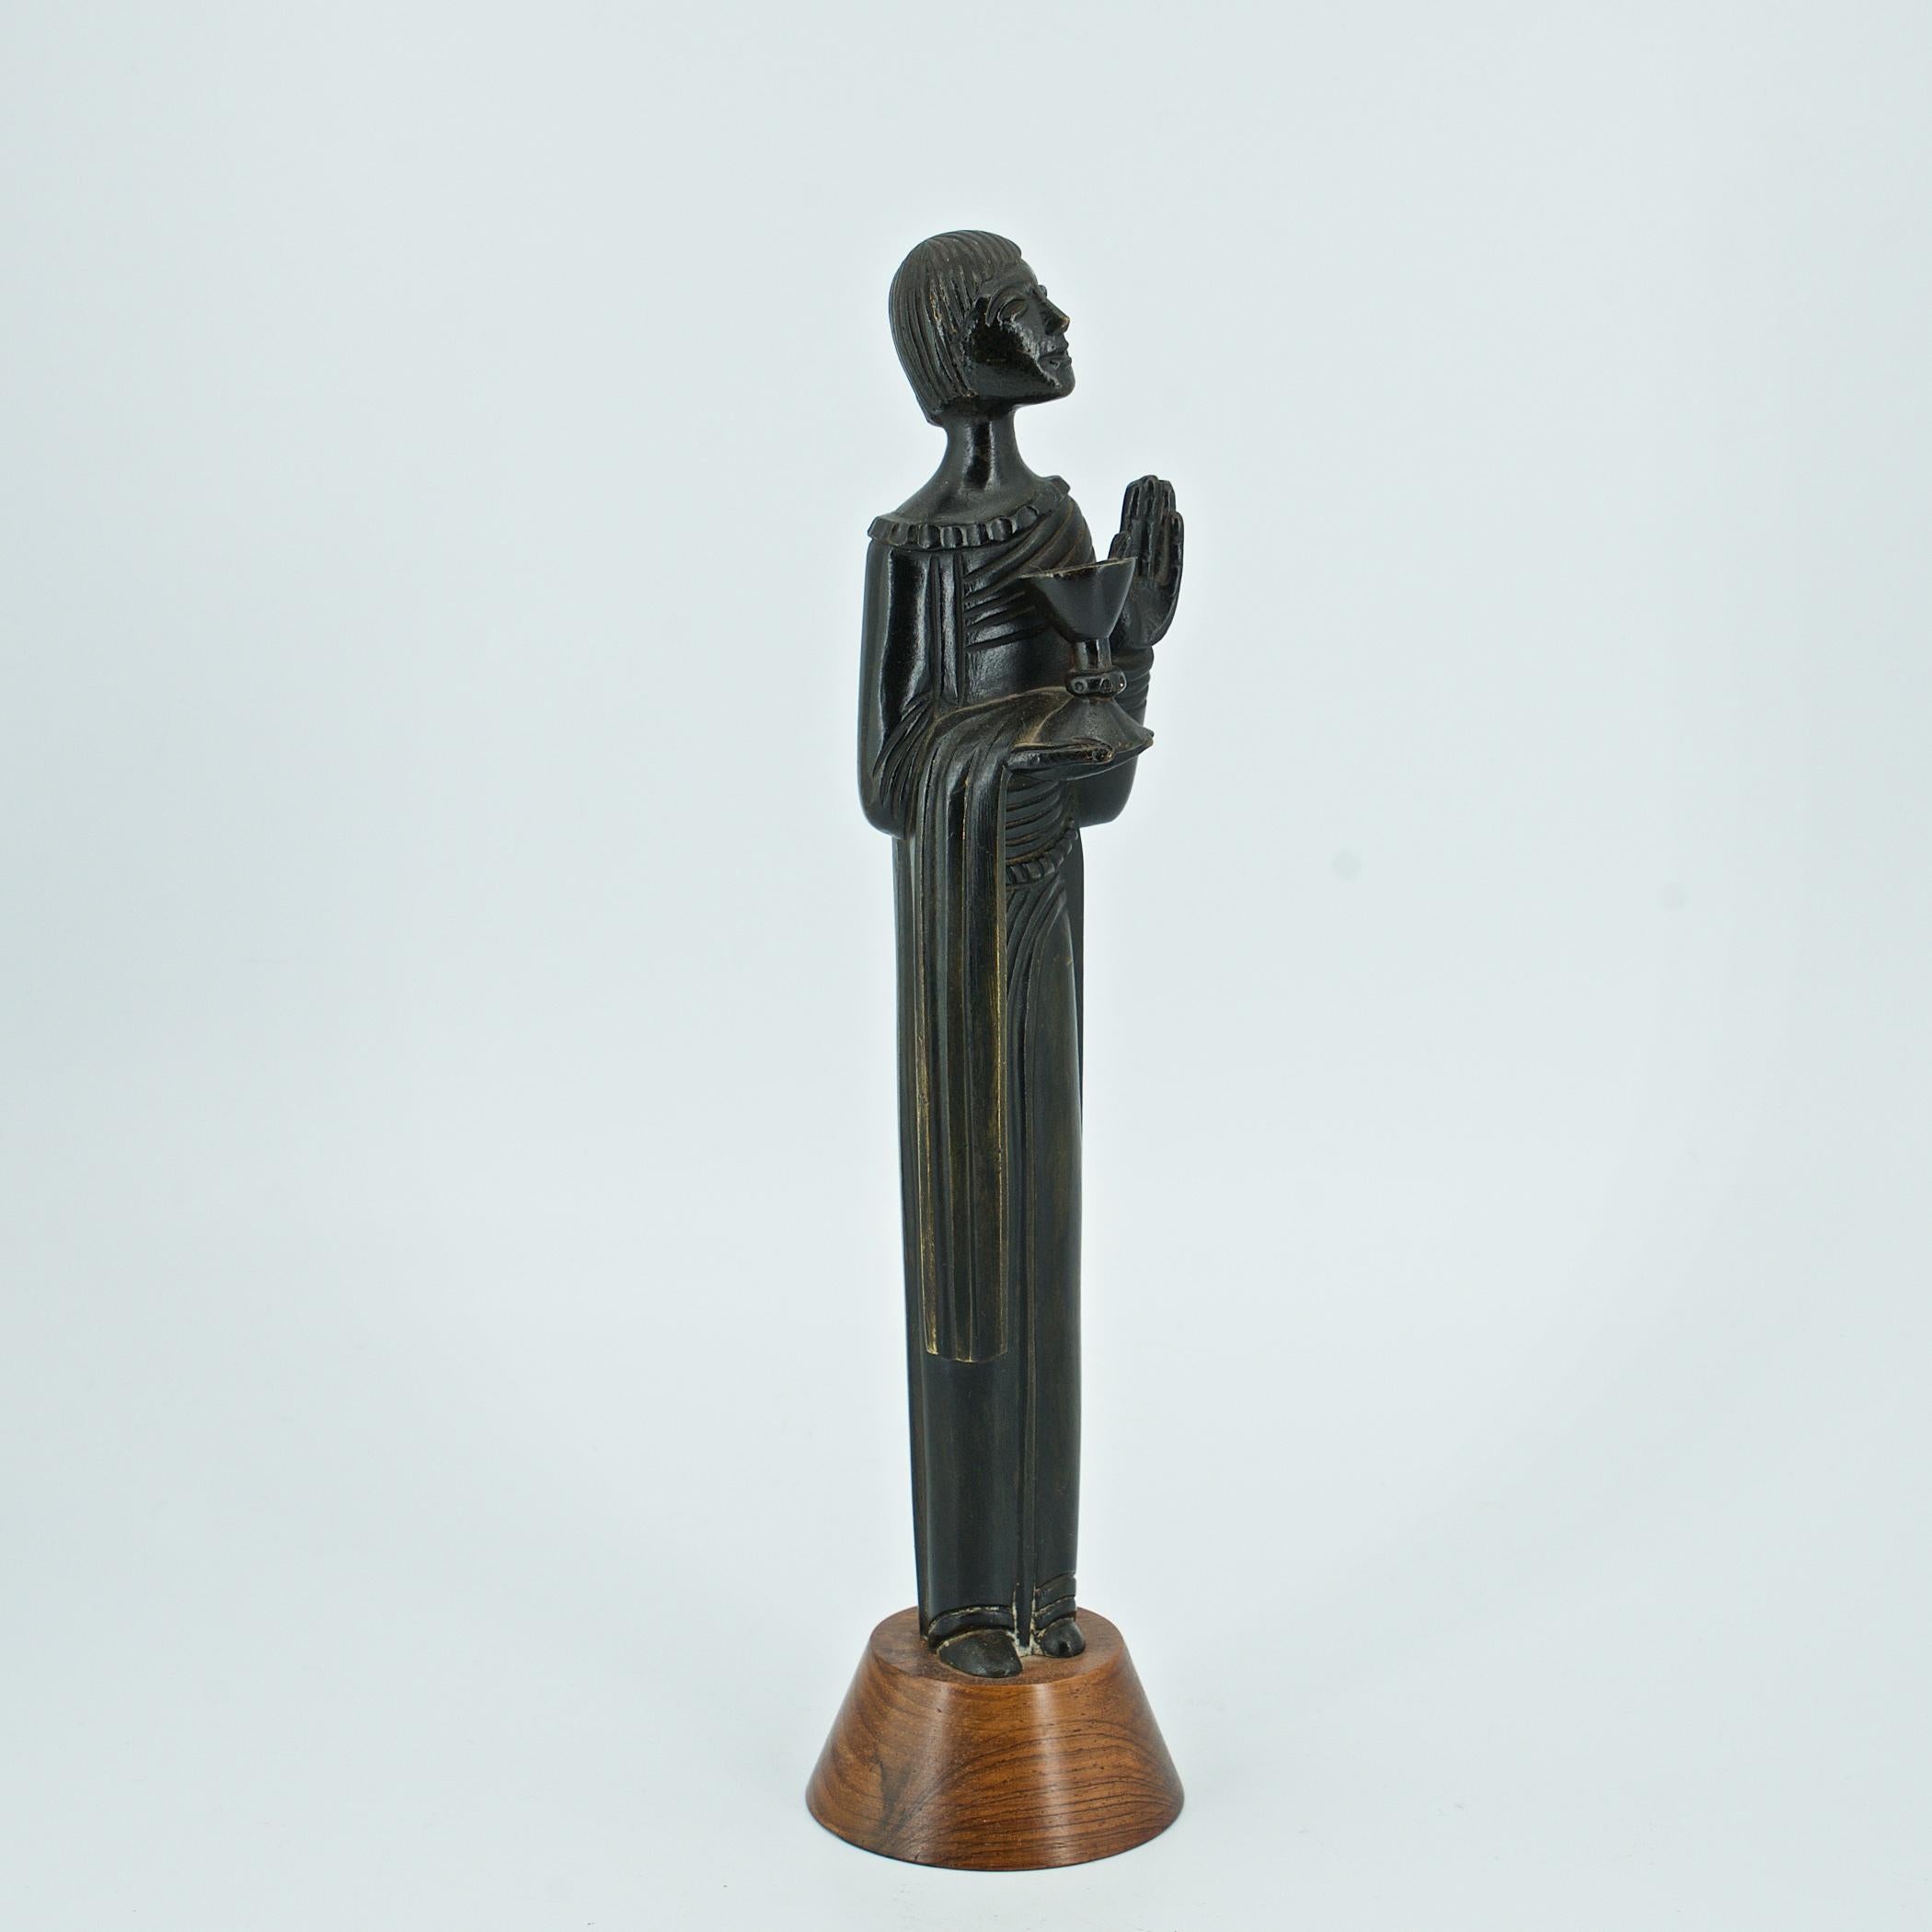 Jean Lambert-Rucki (French 1888-1967.) Patinated Bronze Statuette on hardwood plinth of St. John the Baptist. 

Retains original paper label on bottom inside from Foundry; Adalc Paris, Made in France. Wooden base is stamped, Cheret Paris. Artist